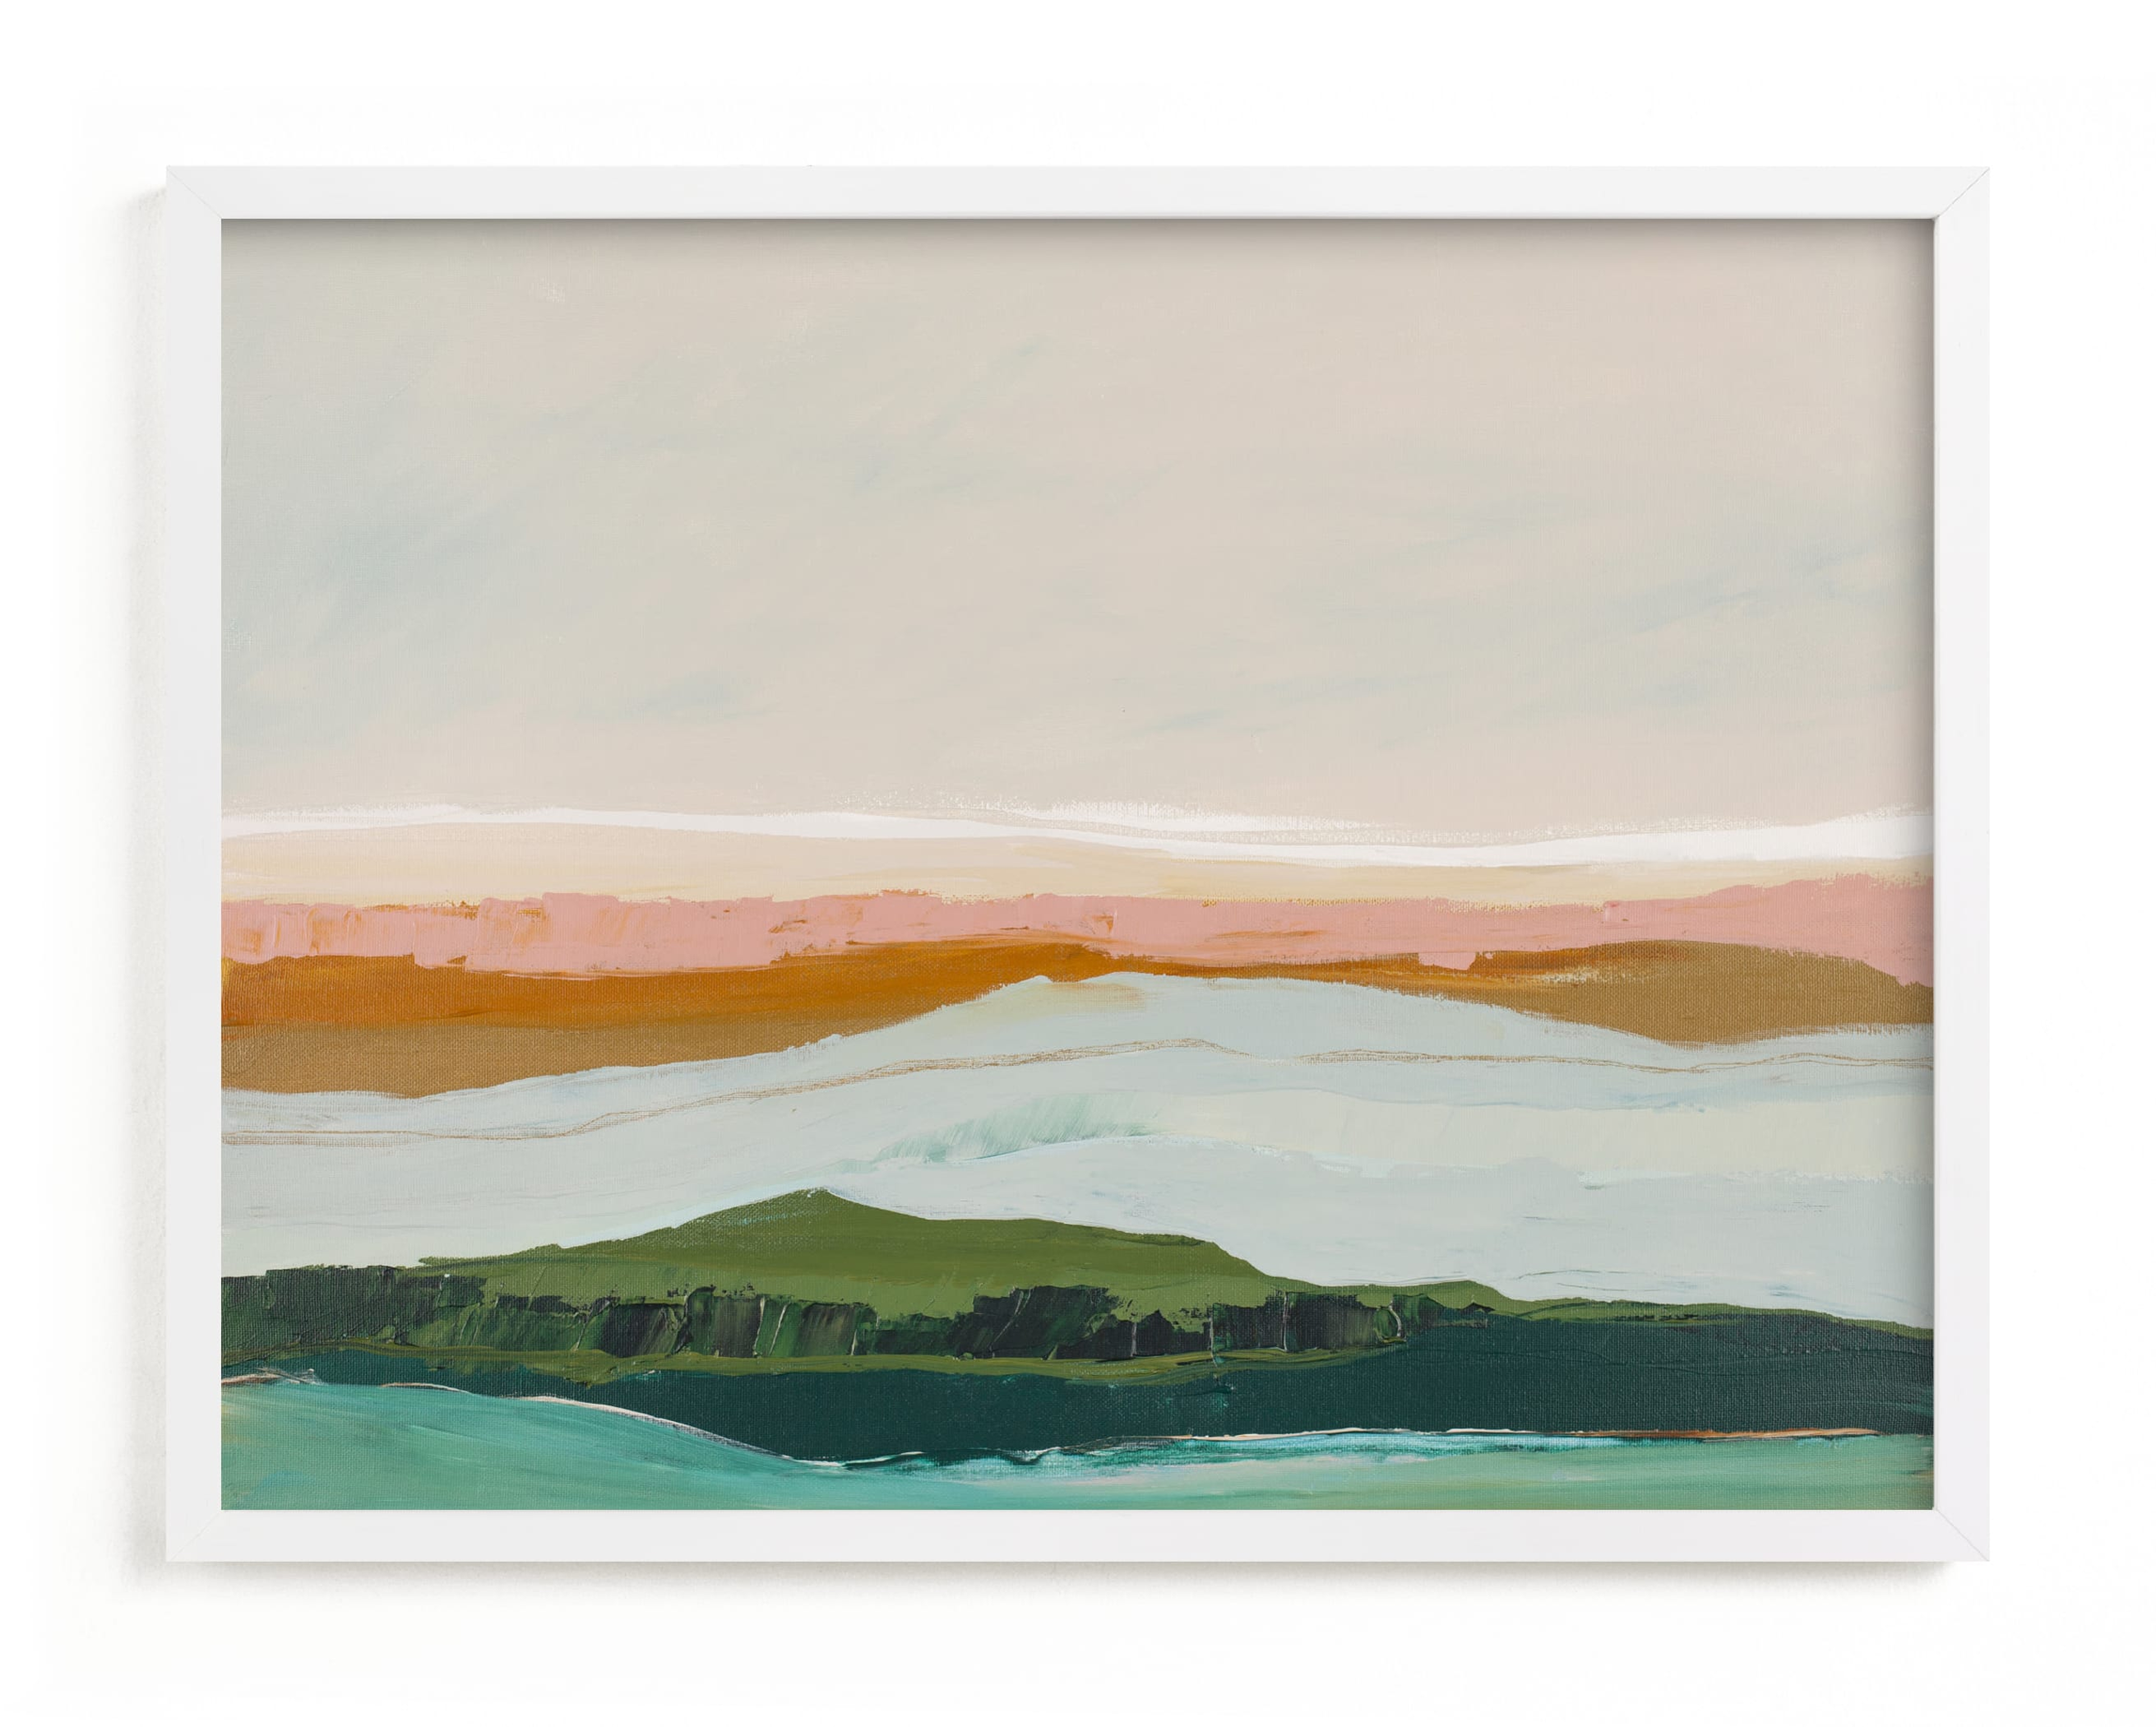 Abstract Seascape Pt Reyes, California 24"x18" by Caryn Owen - Minted